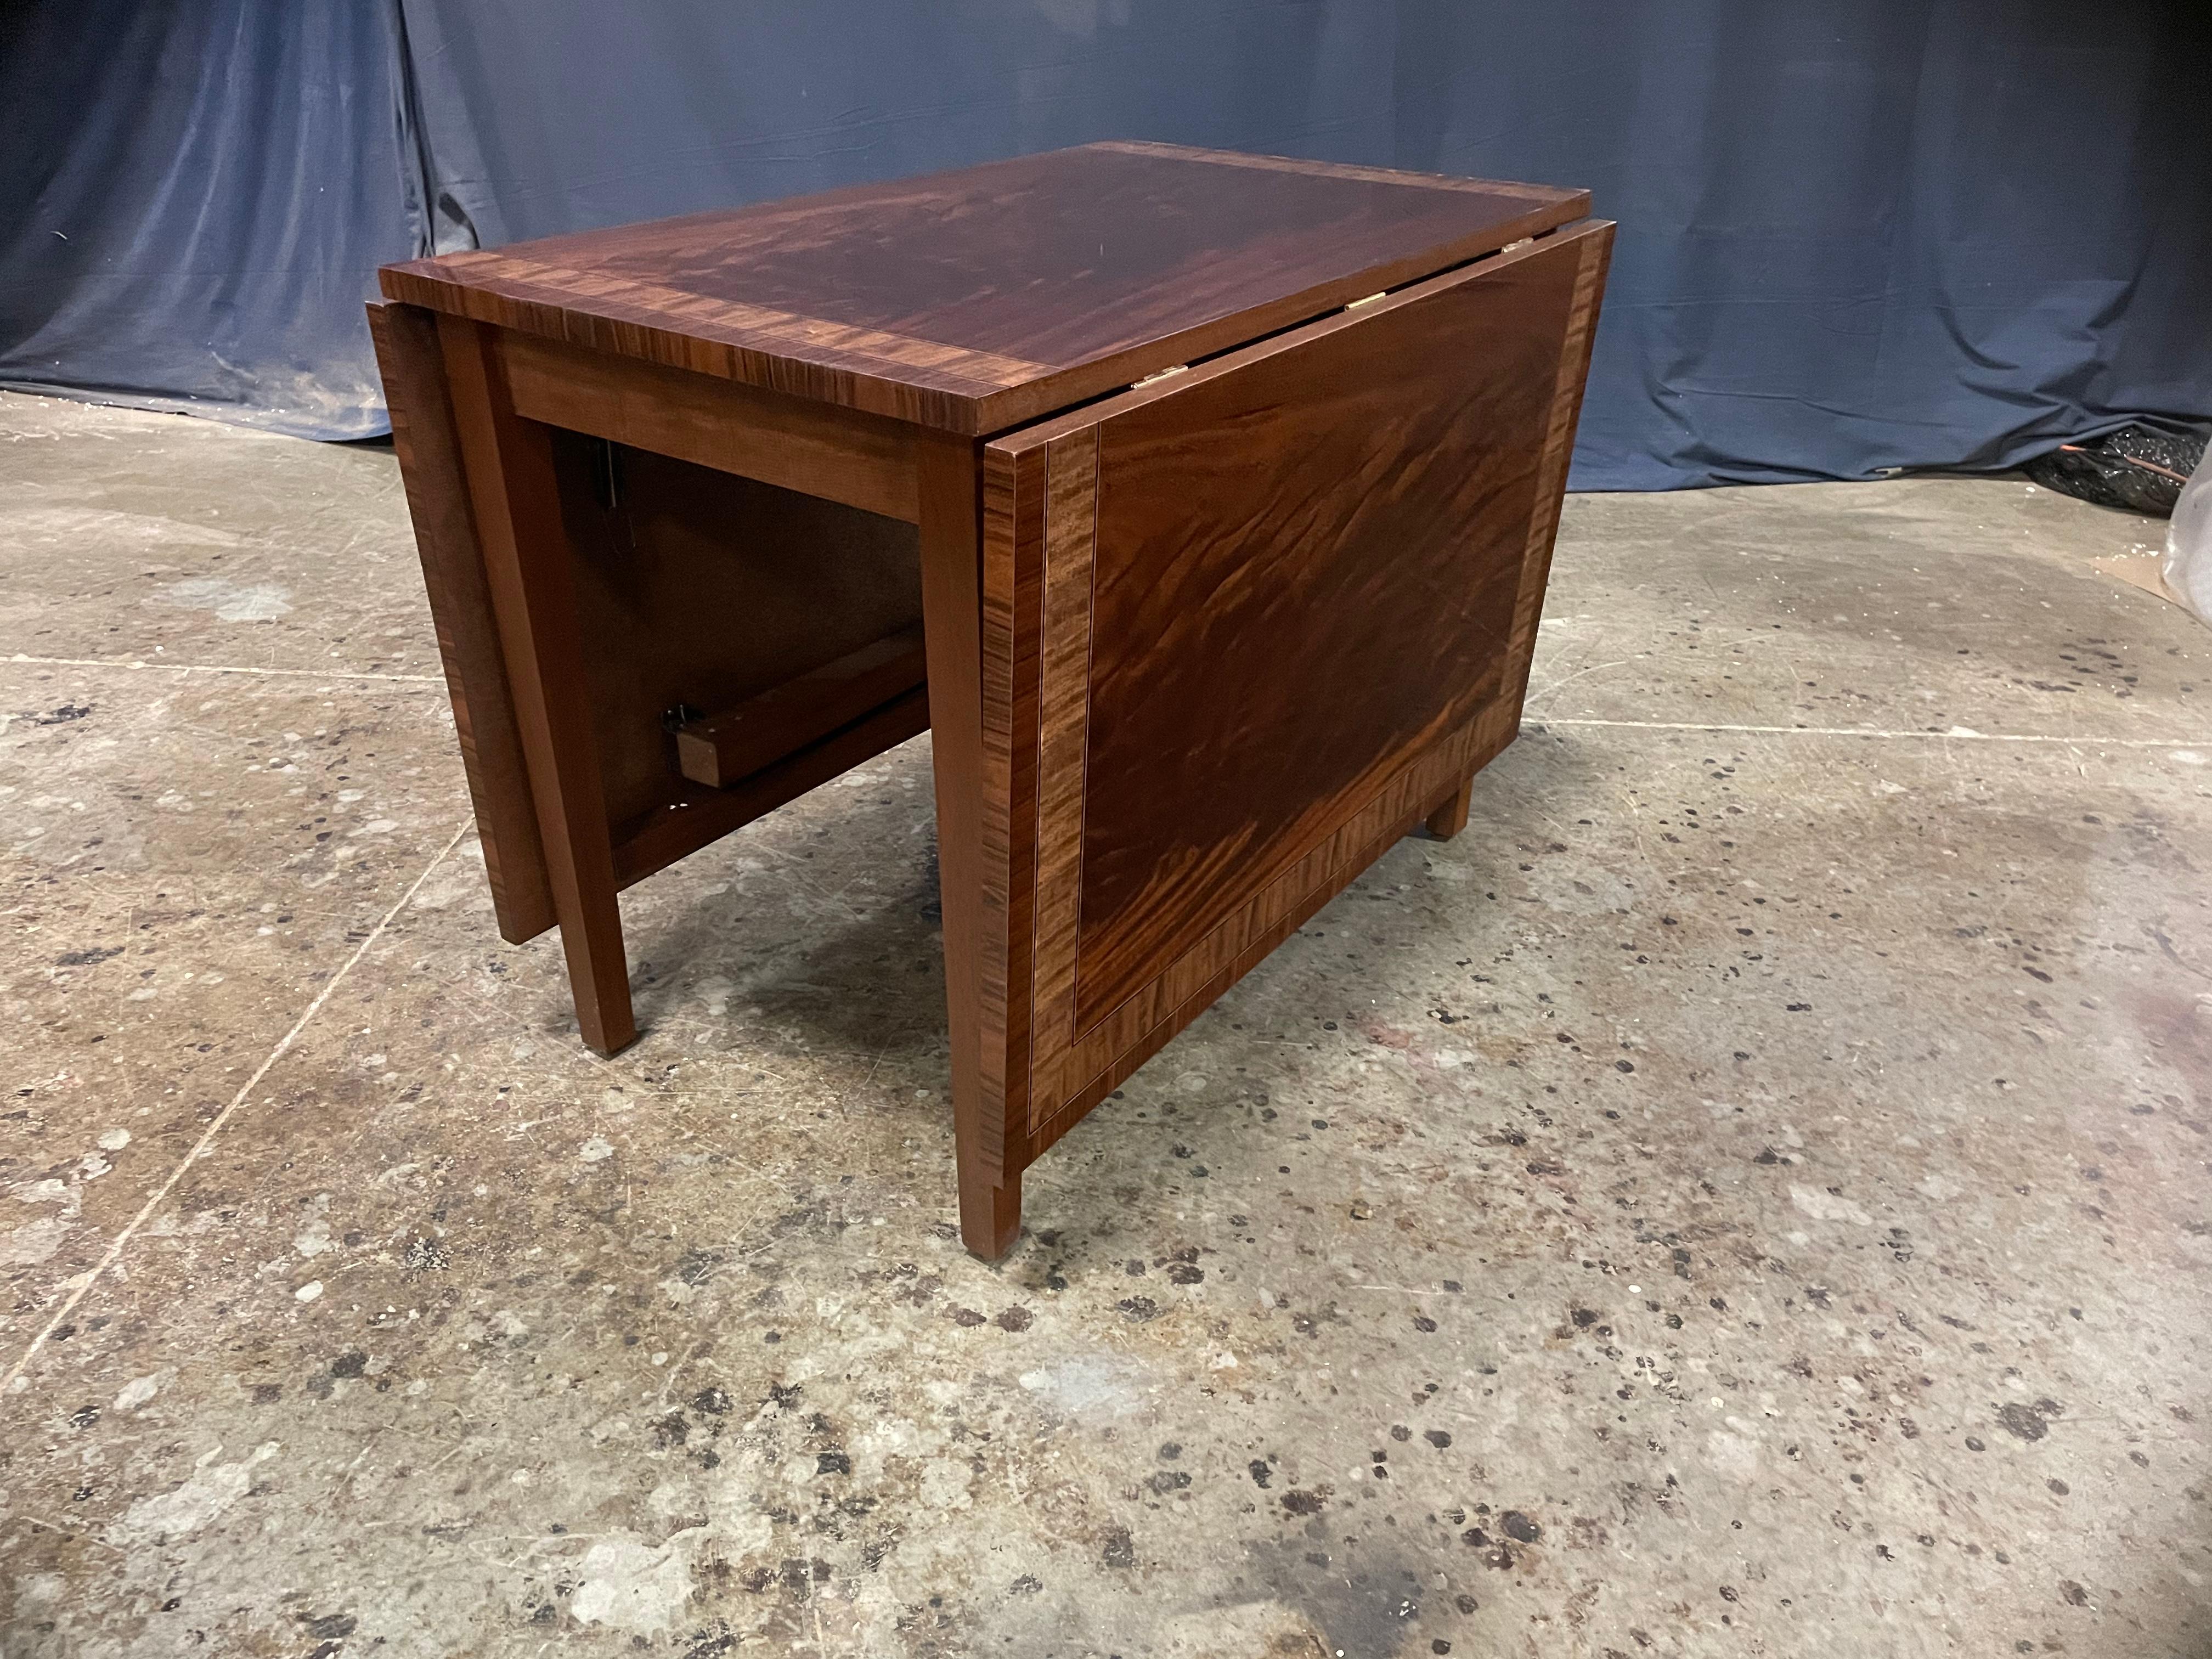 This is a mahogany drop-leaf table made in the Leighton Hall shop. It is ideal for the dining area of an apartment or condo or in a breakfast area. It features a field of swirly crotch mahogany with Pau Ferro and Satinwood borders. The legs are made